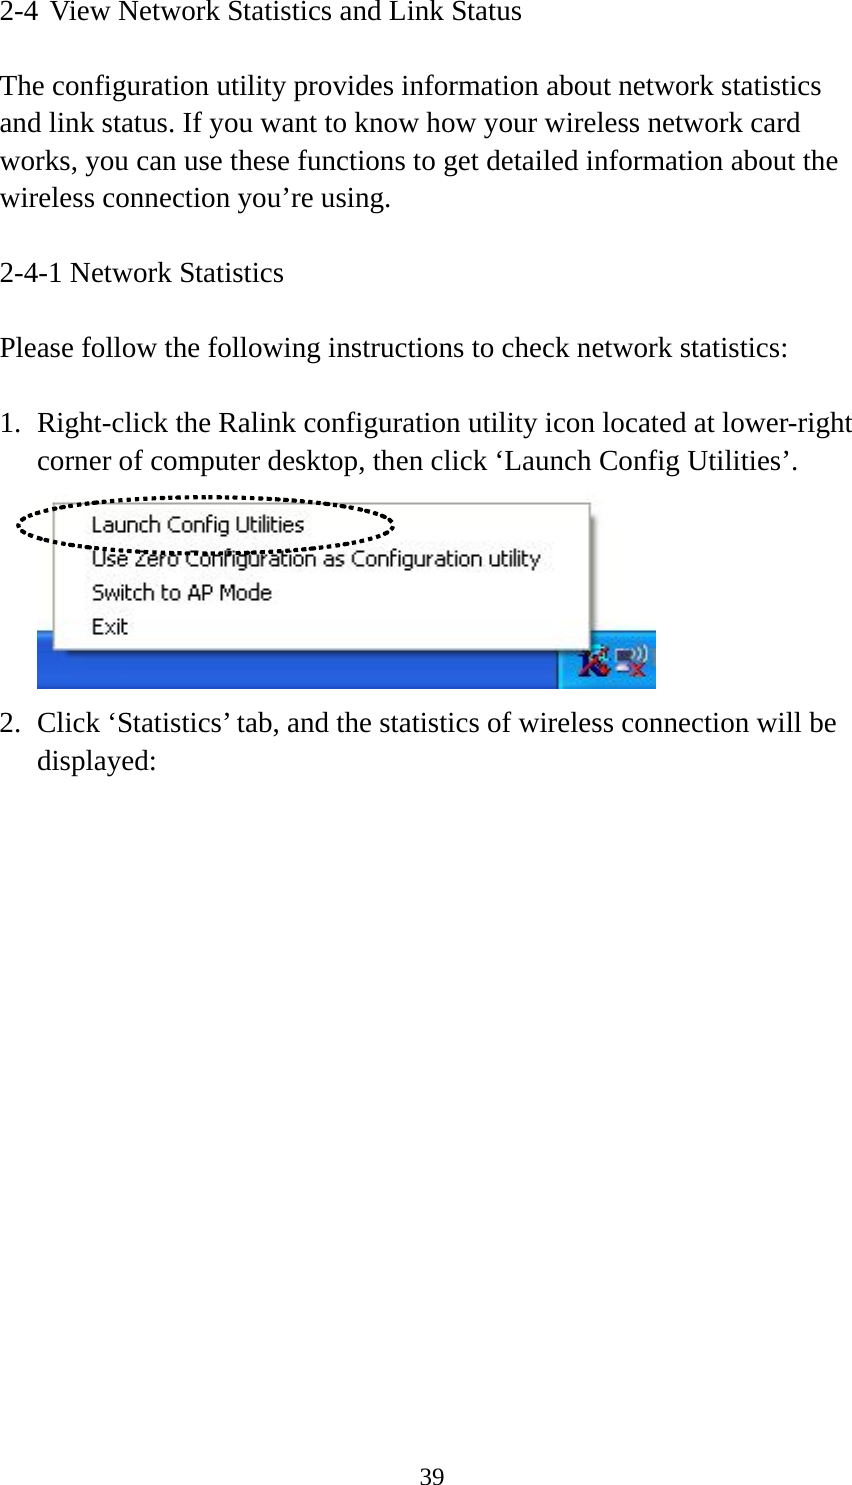  392-4 View Network Statistics and Link Status  The configuration utility provides information about network statistics and link status. If you want to know how your wireless network card works, you can use these functions to get detailed information about the wireless connection you’re using.  2-4-1 Network Statistics  Please follow the following instructions to check network statistics:  1. Right-click the Ralink configuration utility icon located at lower-right corner of computer desktop, then click ‘Launch Config Utilities’.  2. Click ‘Statistics’ tab, and the statistics of wireless connection will be displayed: 